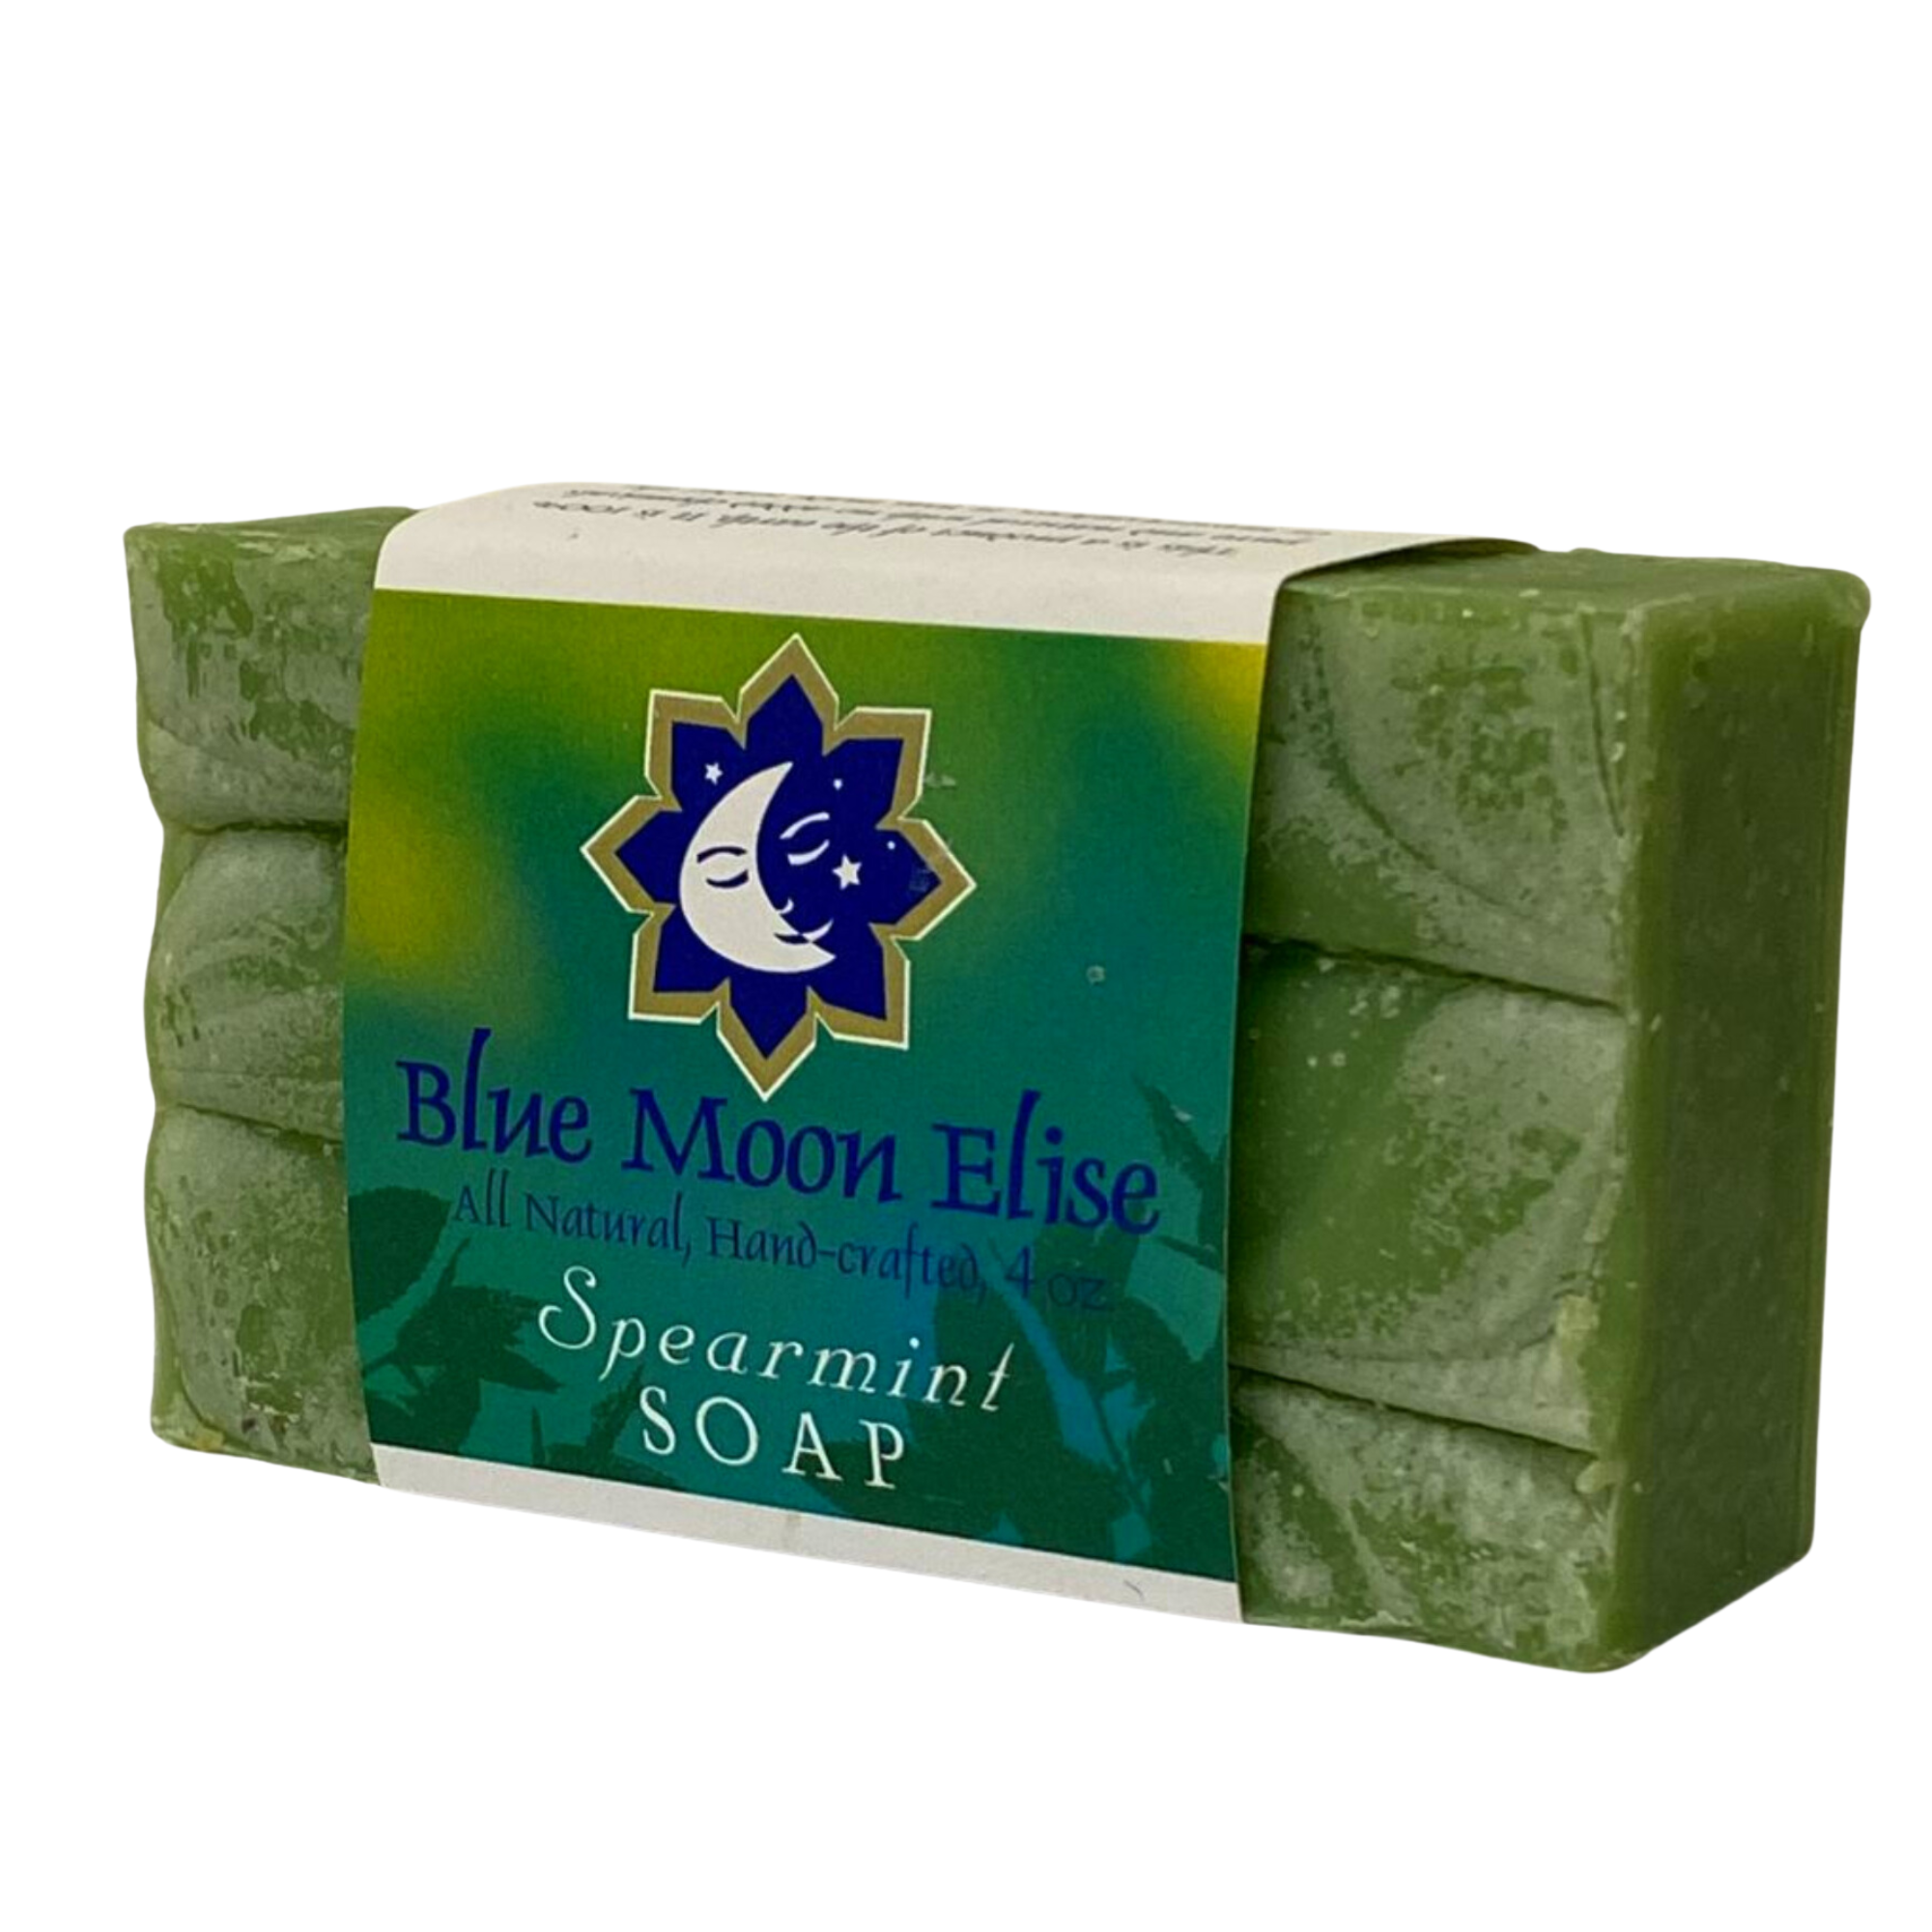 Spearmint Soap (Buy 1, Add 2 More for FREE)